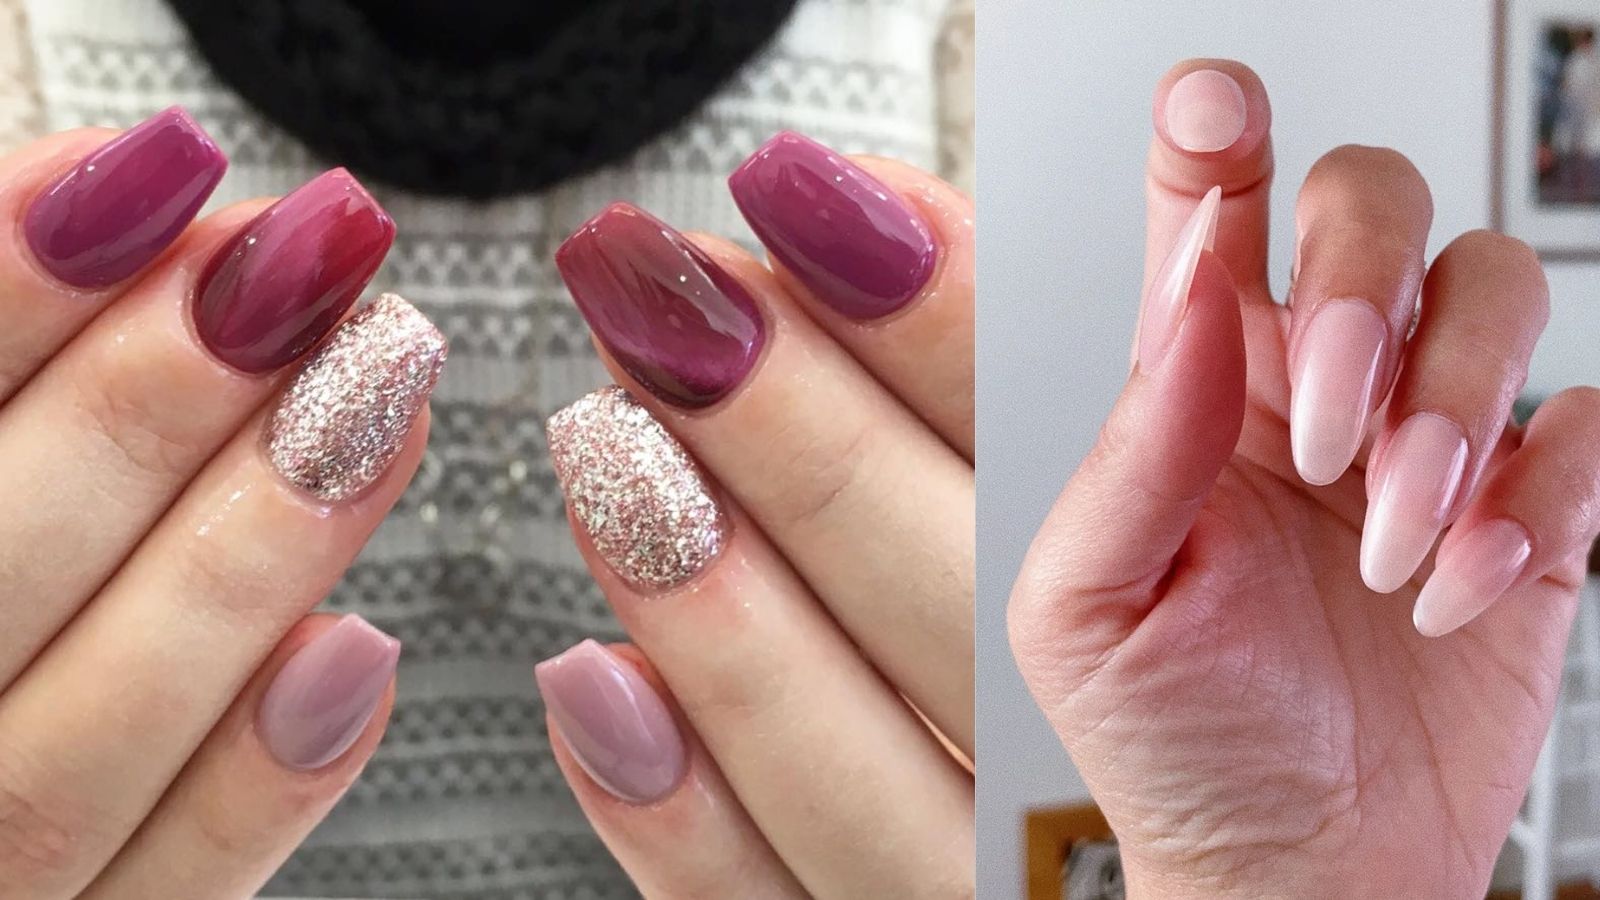 Many people still do nail extensions